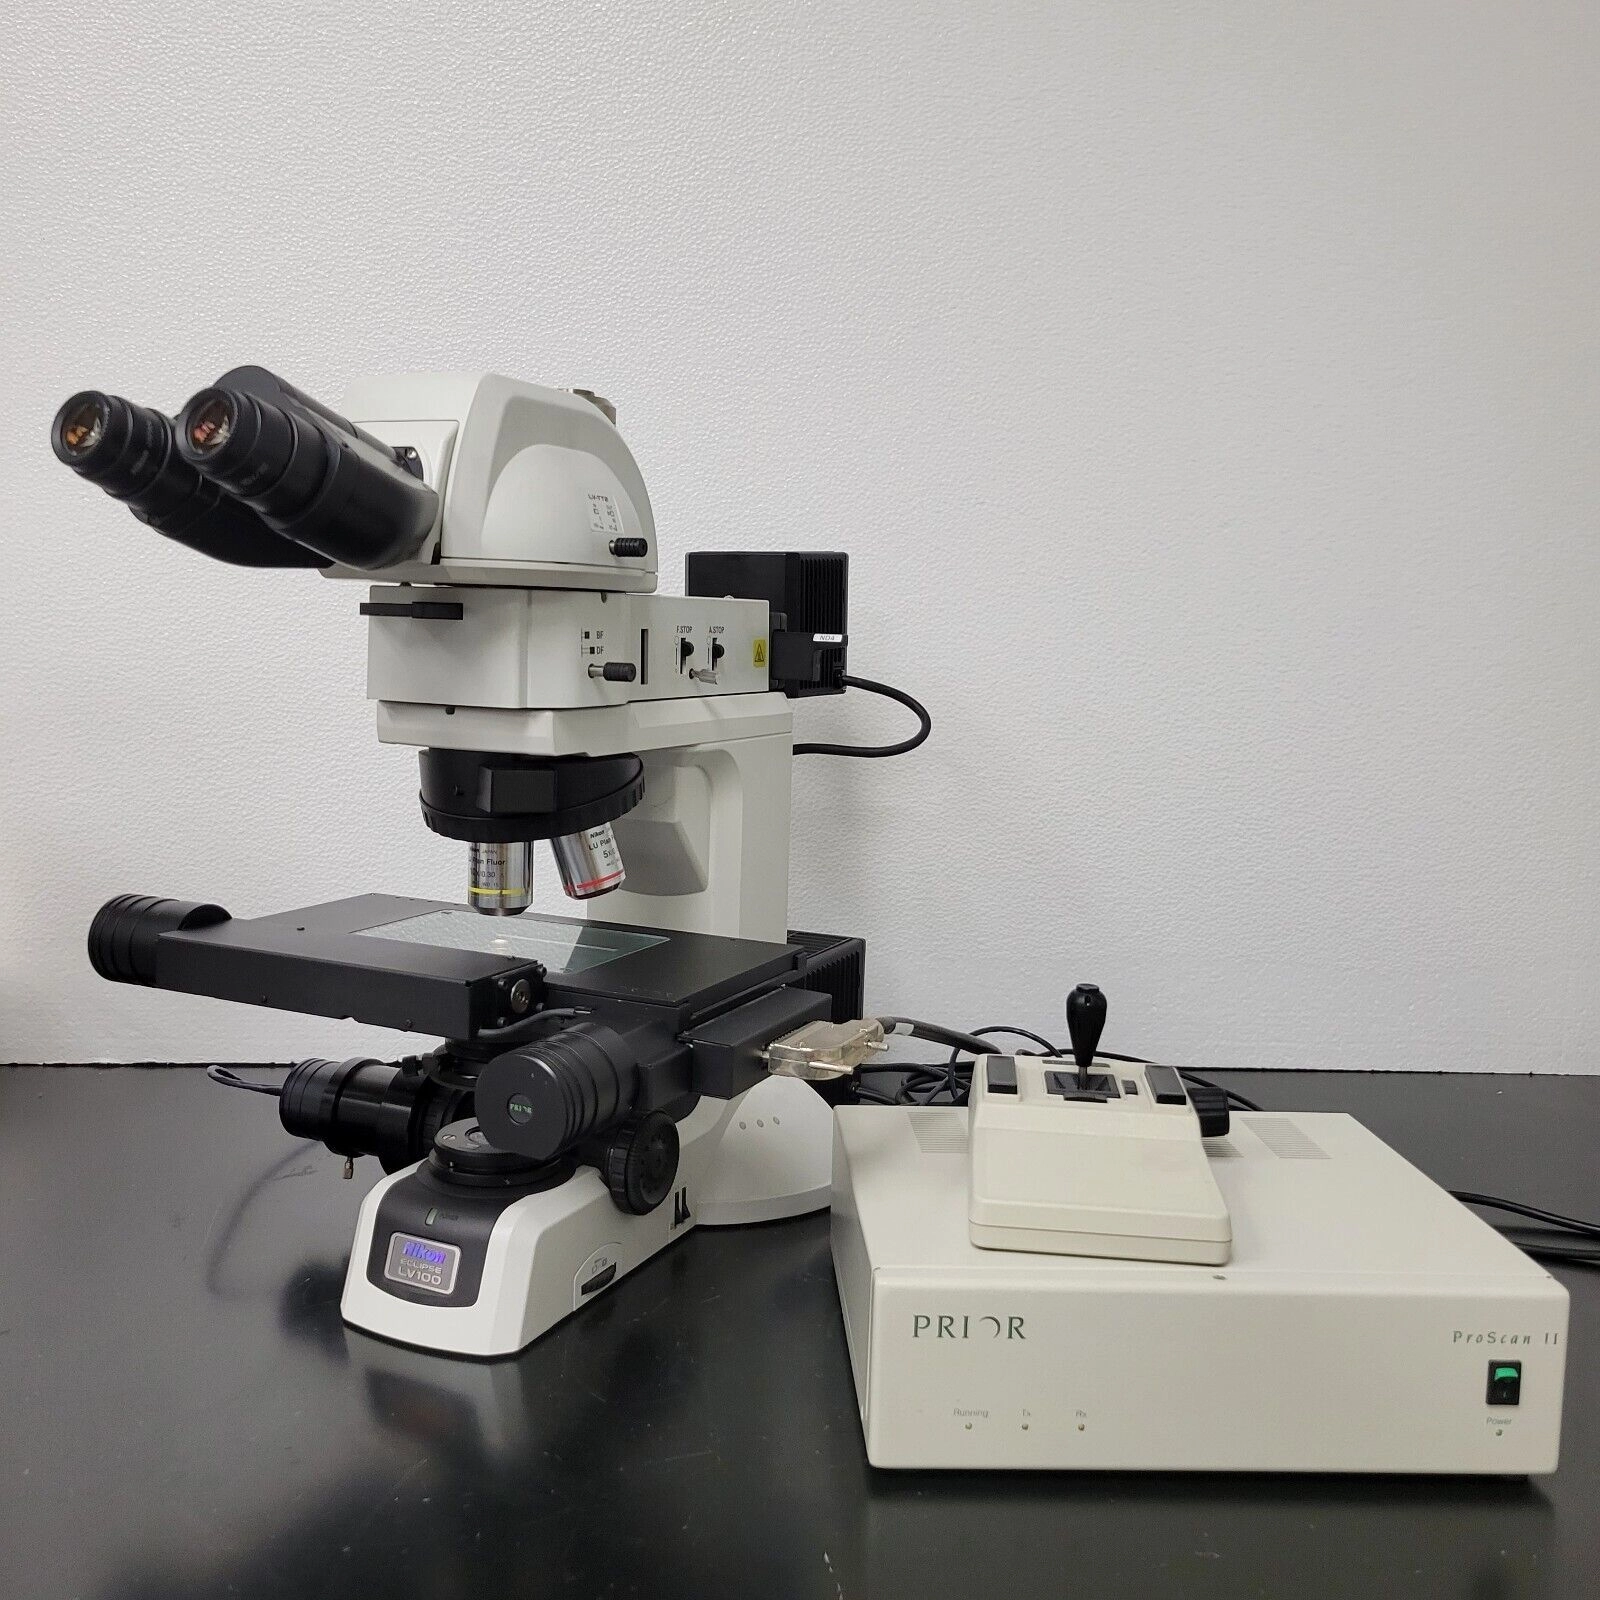 Nikon Microscope Eclipse LV100 with Motorized Stage Metallurgical